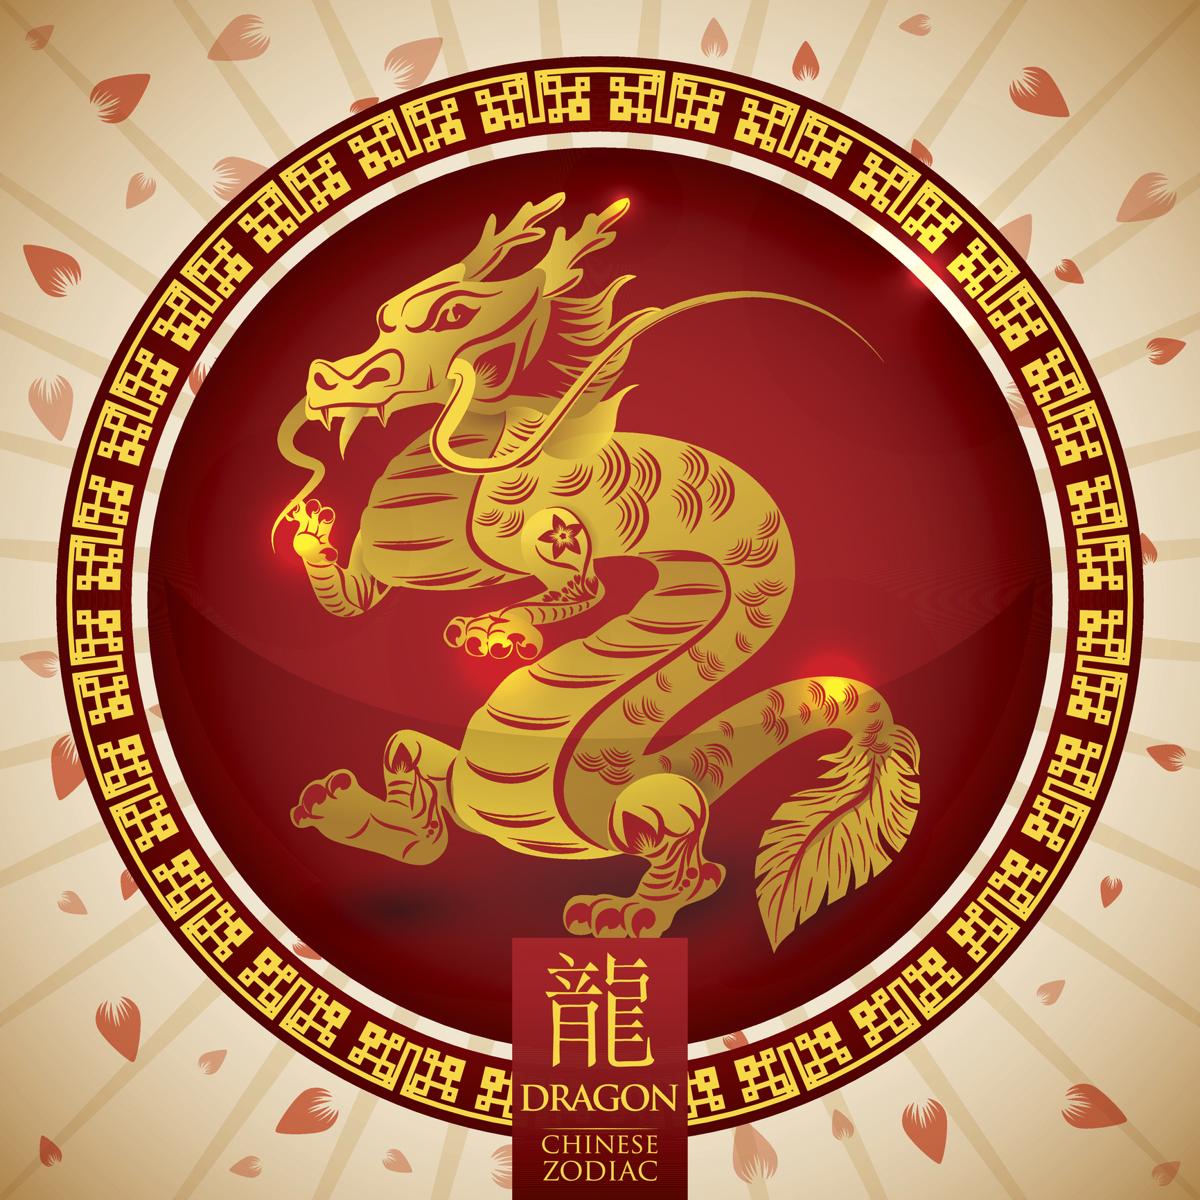 Detailed Information About the Chinese Zodiac Symbols and Meanings1200 x 1200